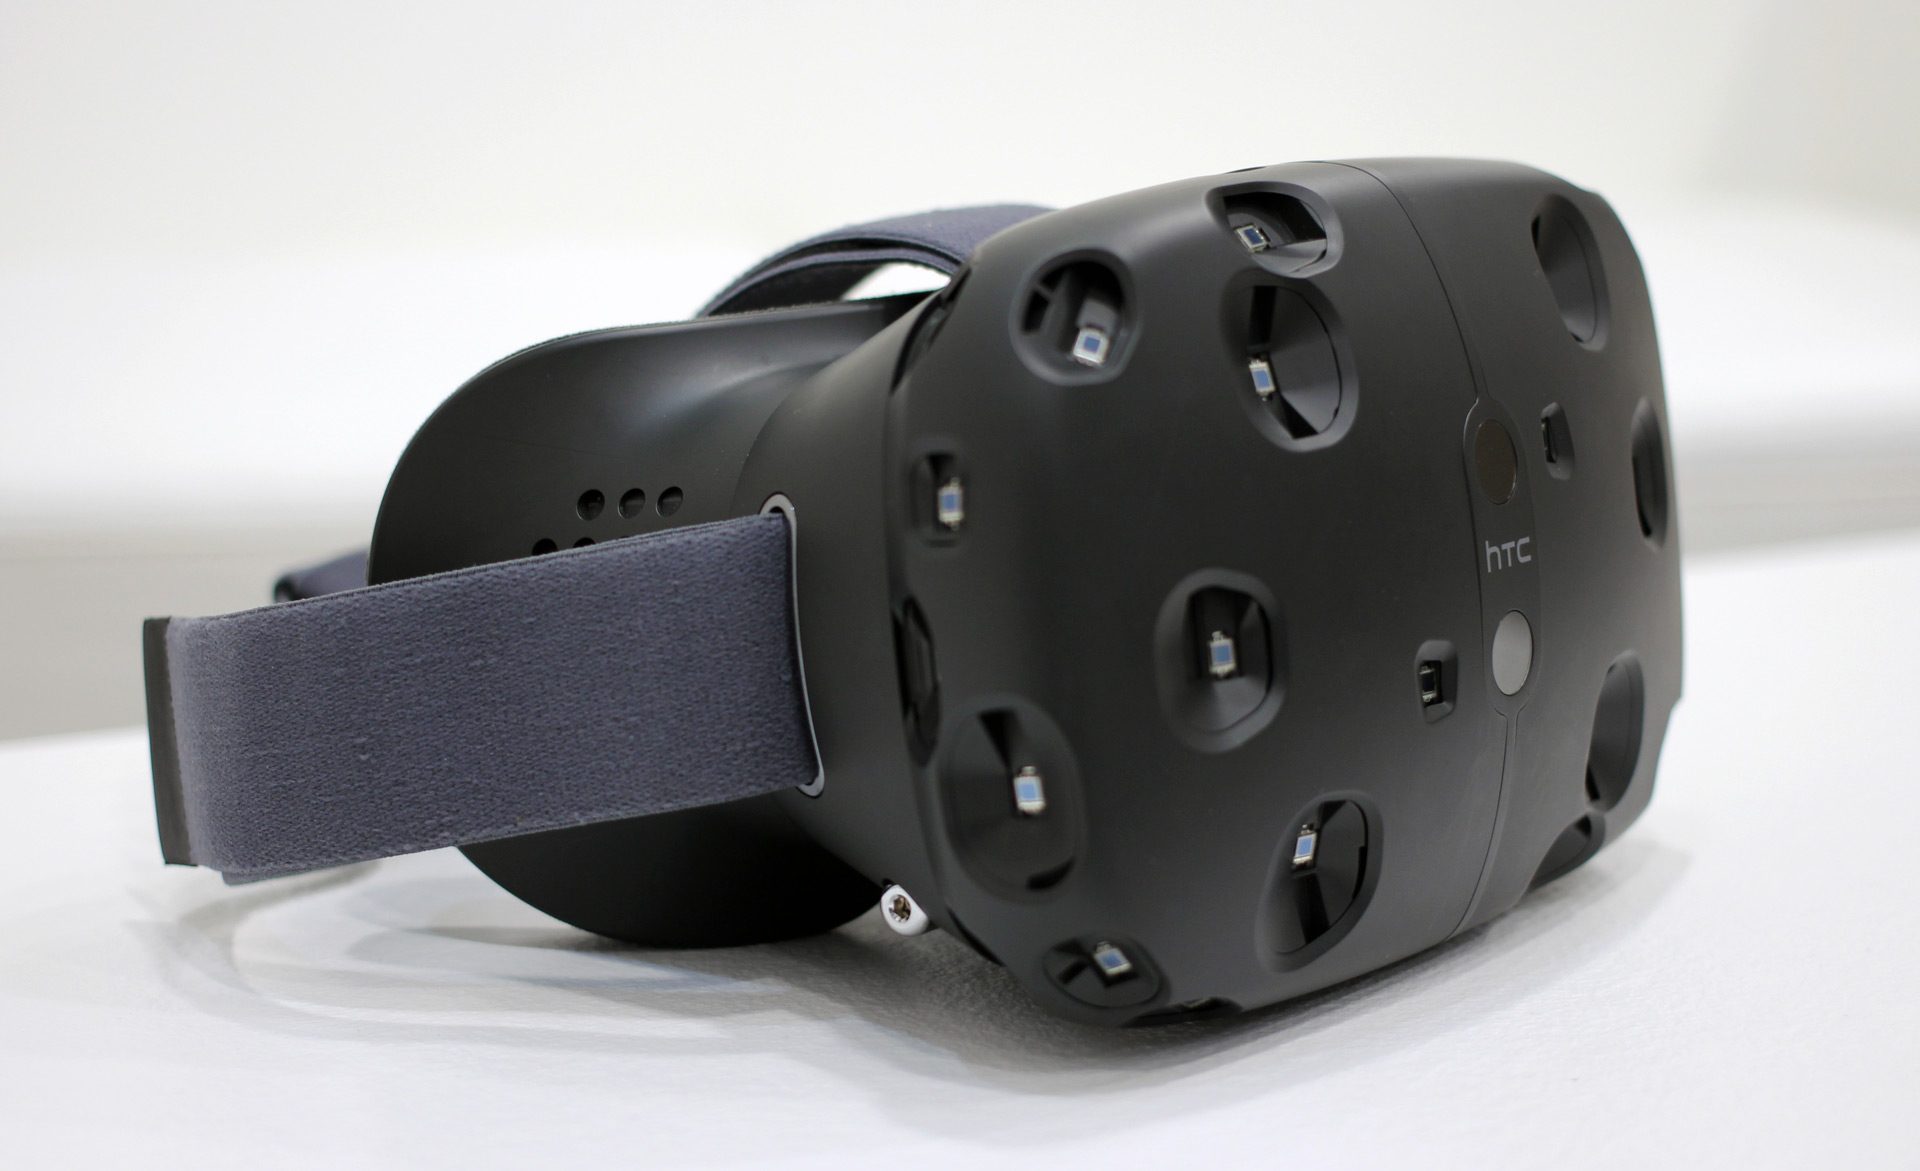 HTC Vive Support and "New Morpheus Features" Coming to Unreal Engine 4